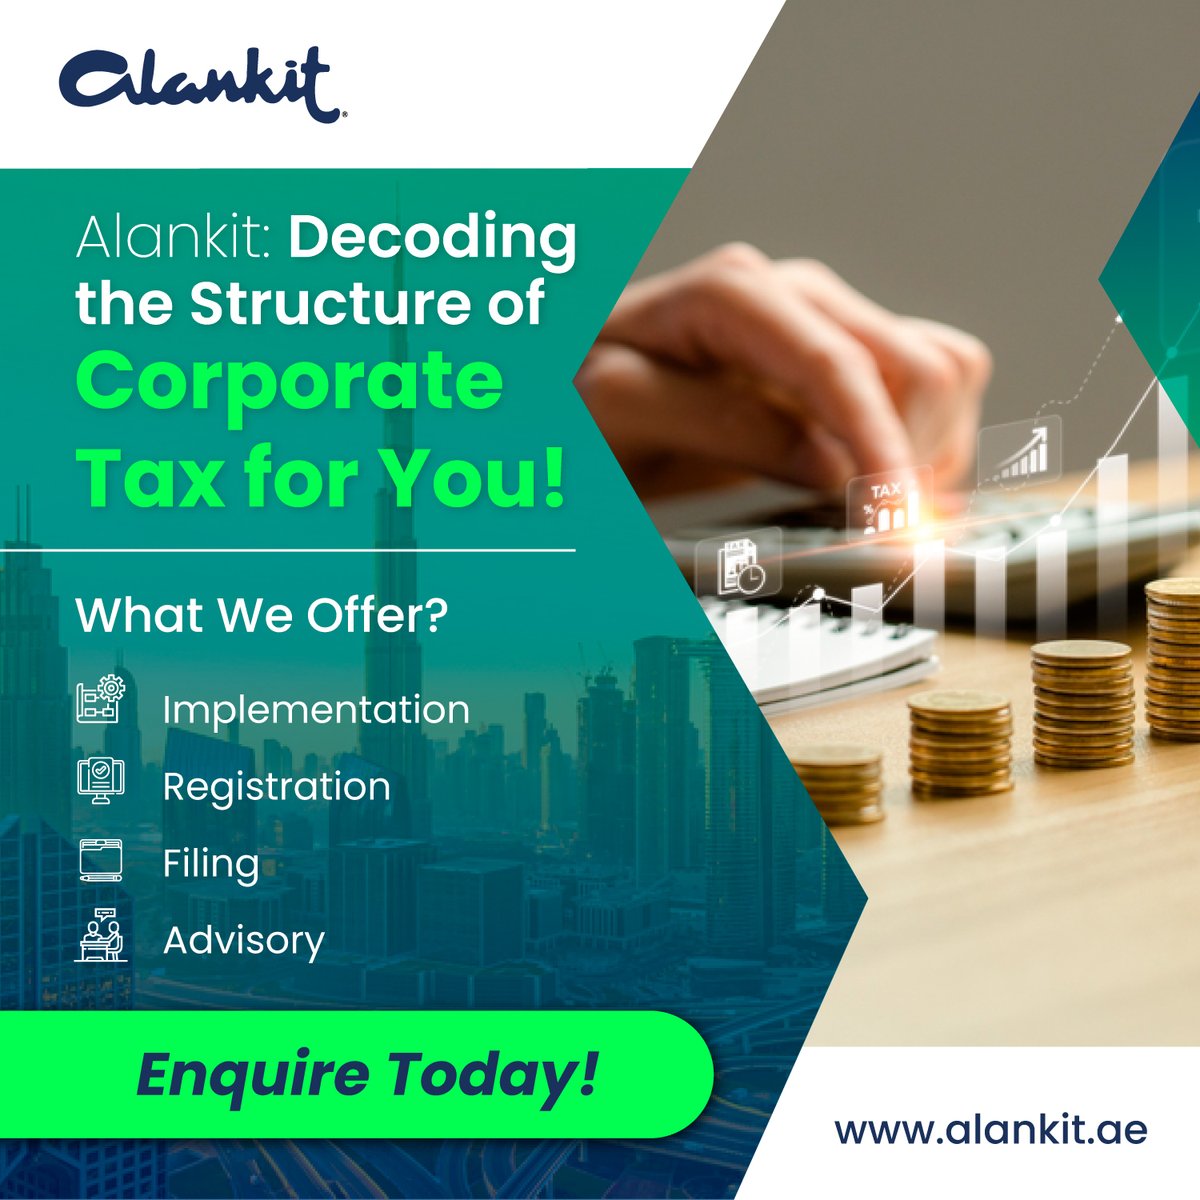 Stay ahead of the curve with our tailored support for the Corporate Tax regime in the UAE. Compliance made simple!

Call us at +971 42770936 
Website - alankit.ae

#corporatetax #taxconsultantsinUAE #taxagent #financeadvisor #incometaxfiling #efiling #directtax